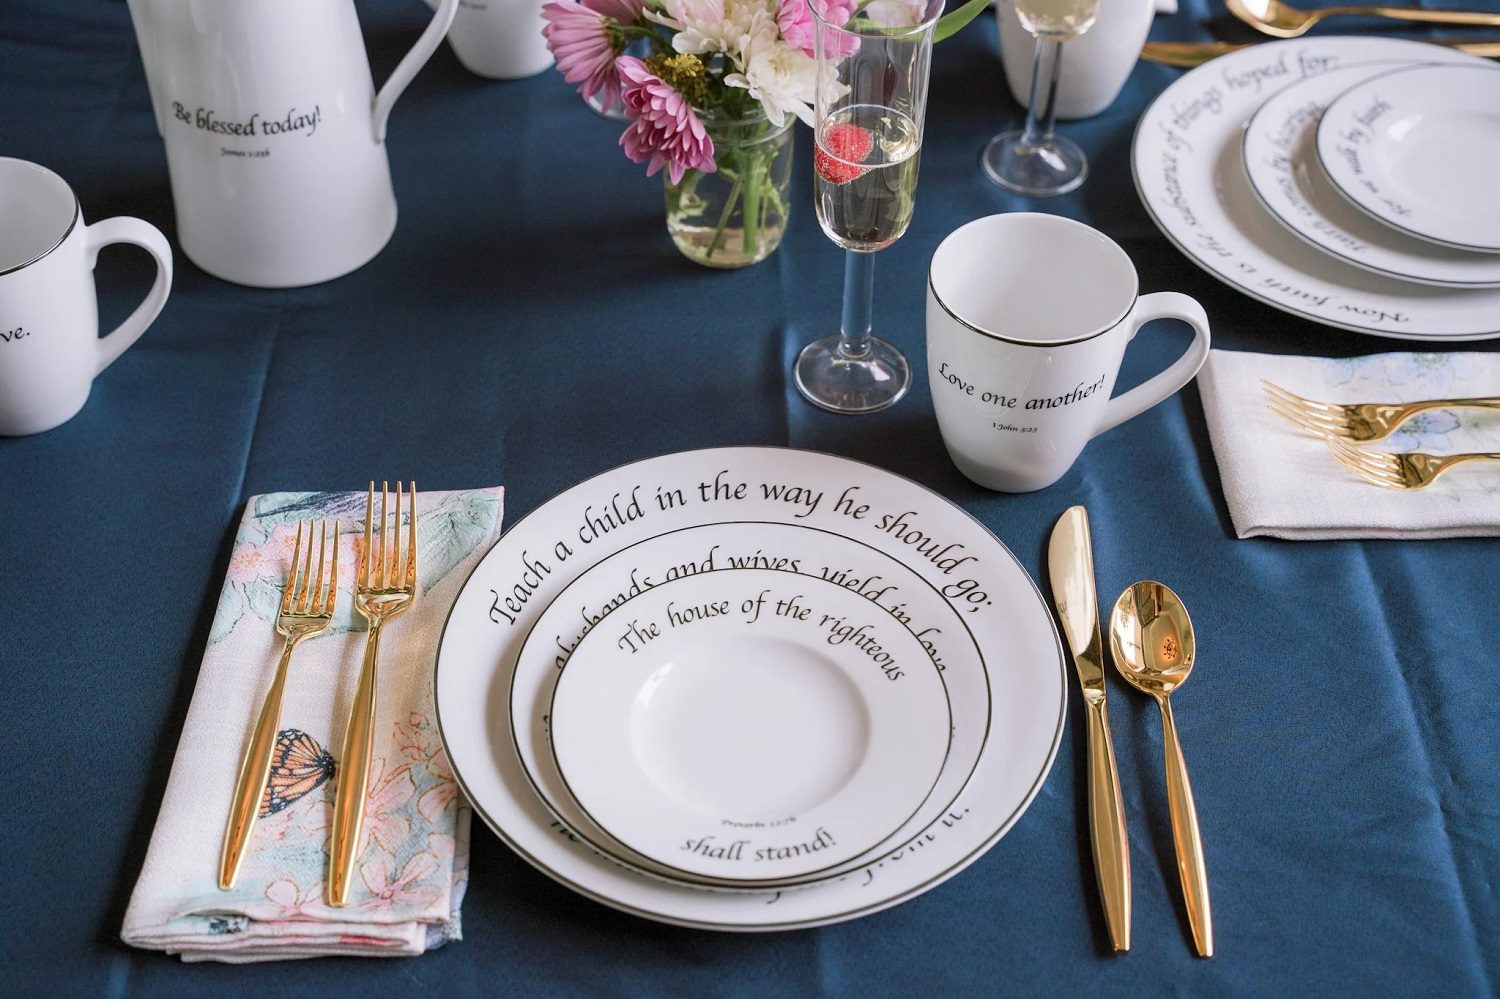 Plate setting from Daily Bread dinnerware collection